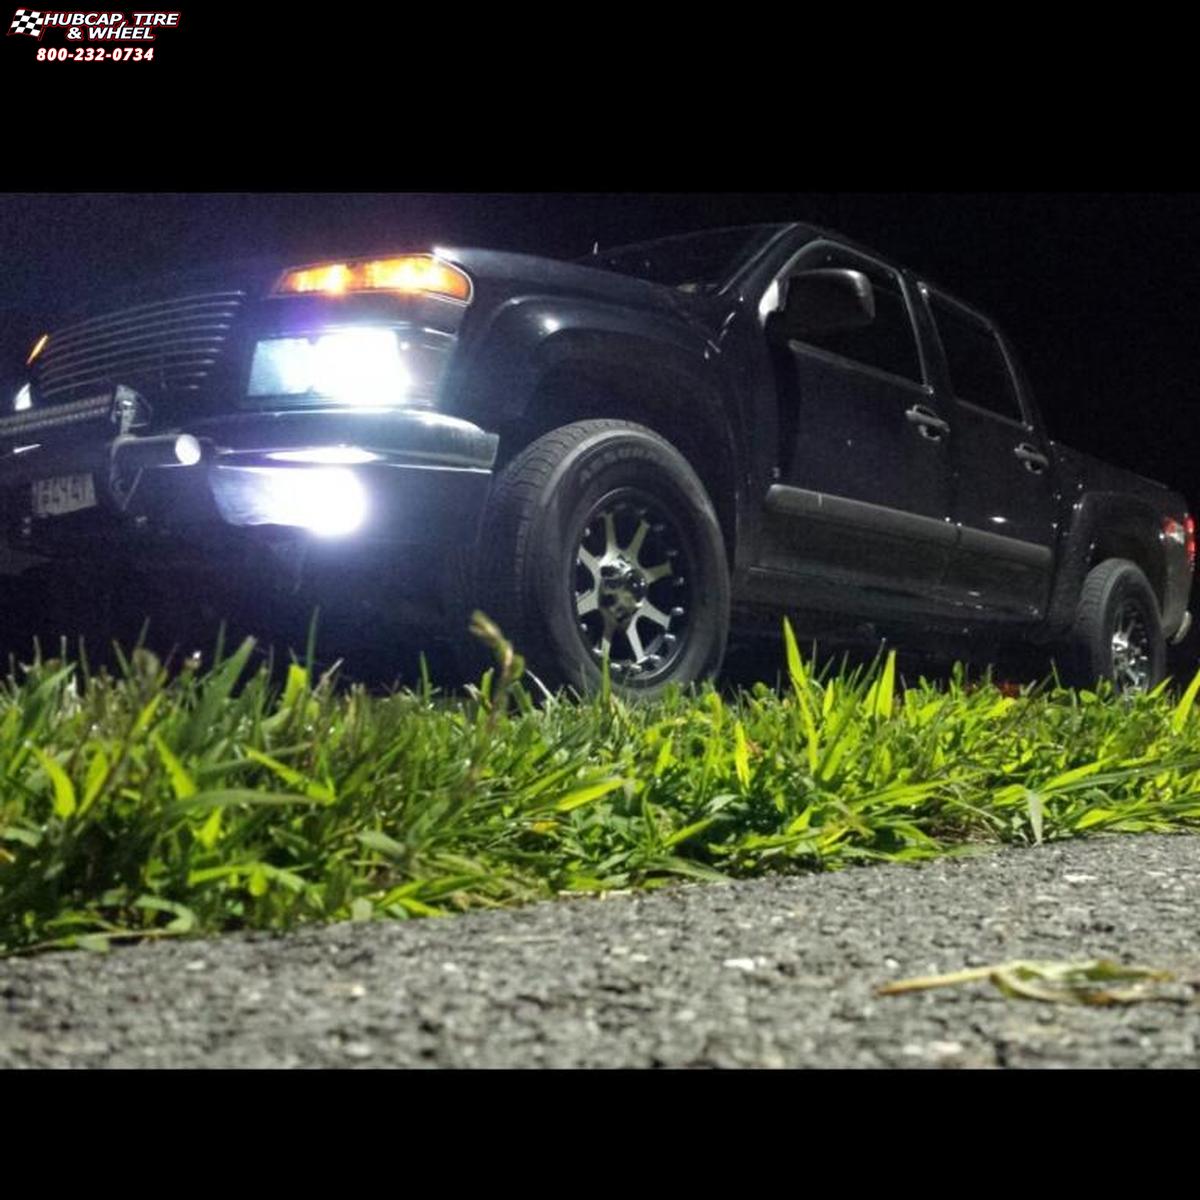 vehicle gallery/2008 chevrolet colorado xd series xd798 addict  Matte Black Machined wheels and rims